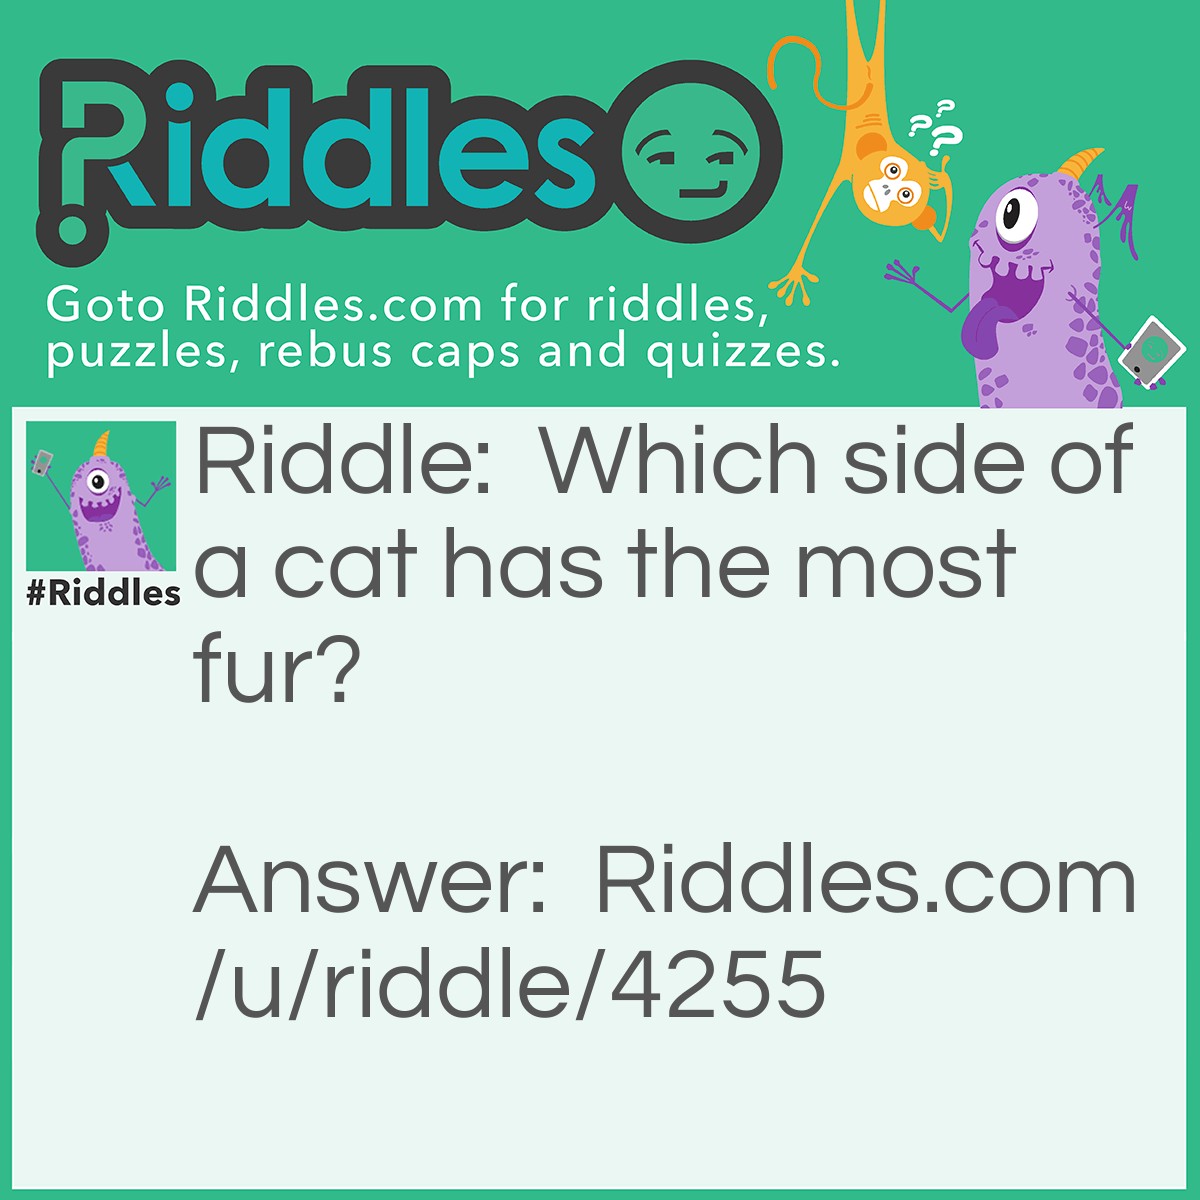 Riddle: Which side of a cat has the most fur? Answer: The outside.